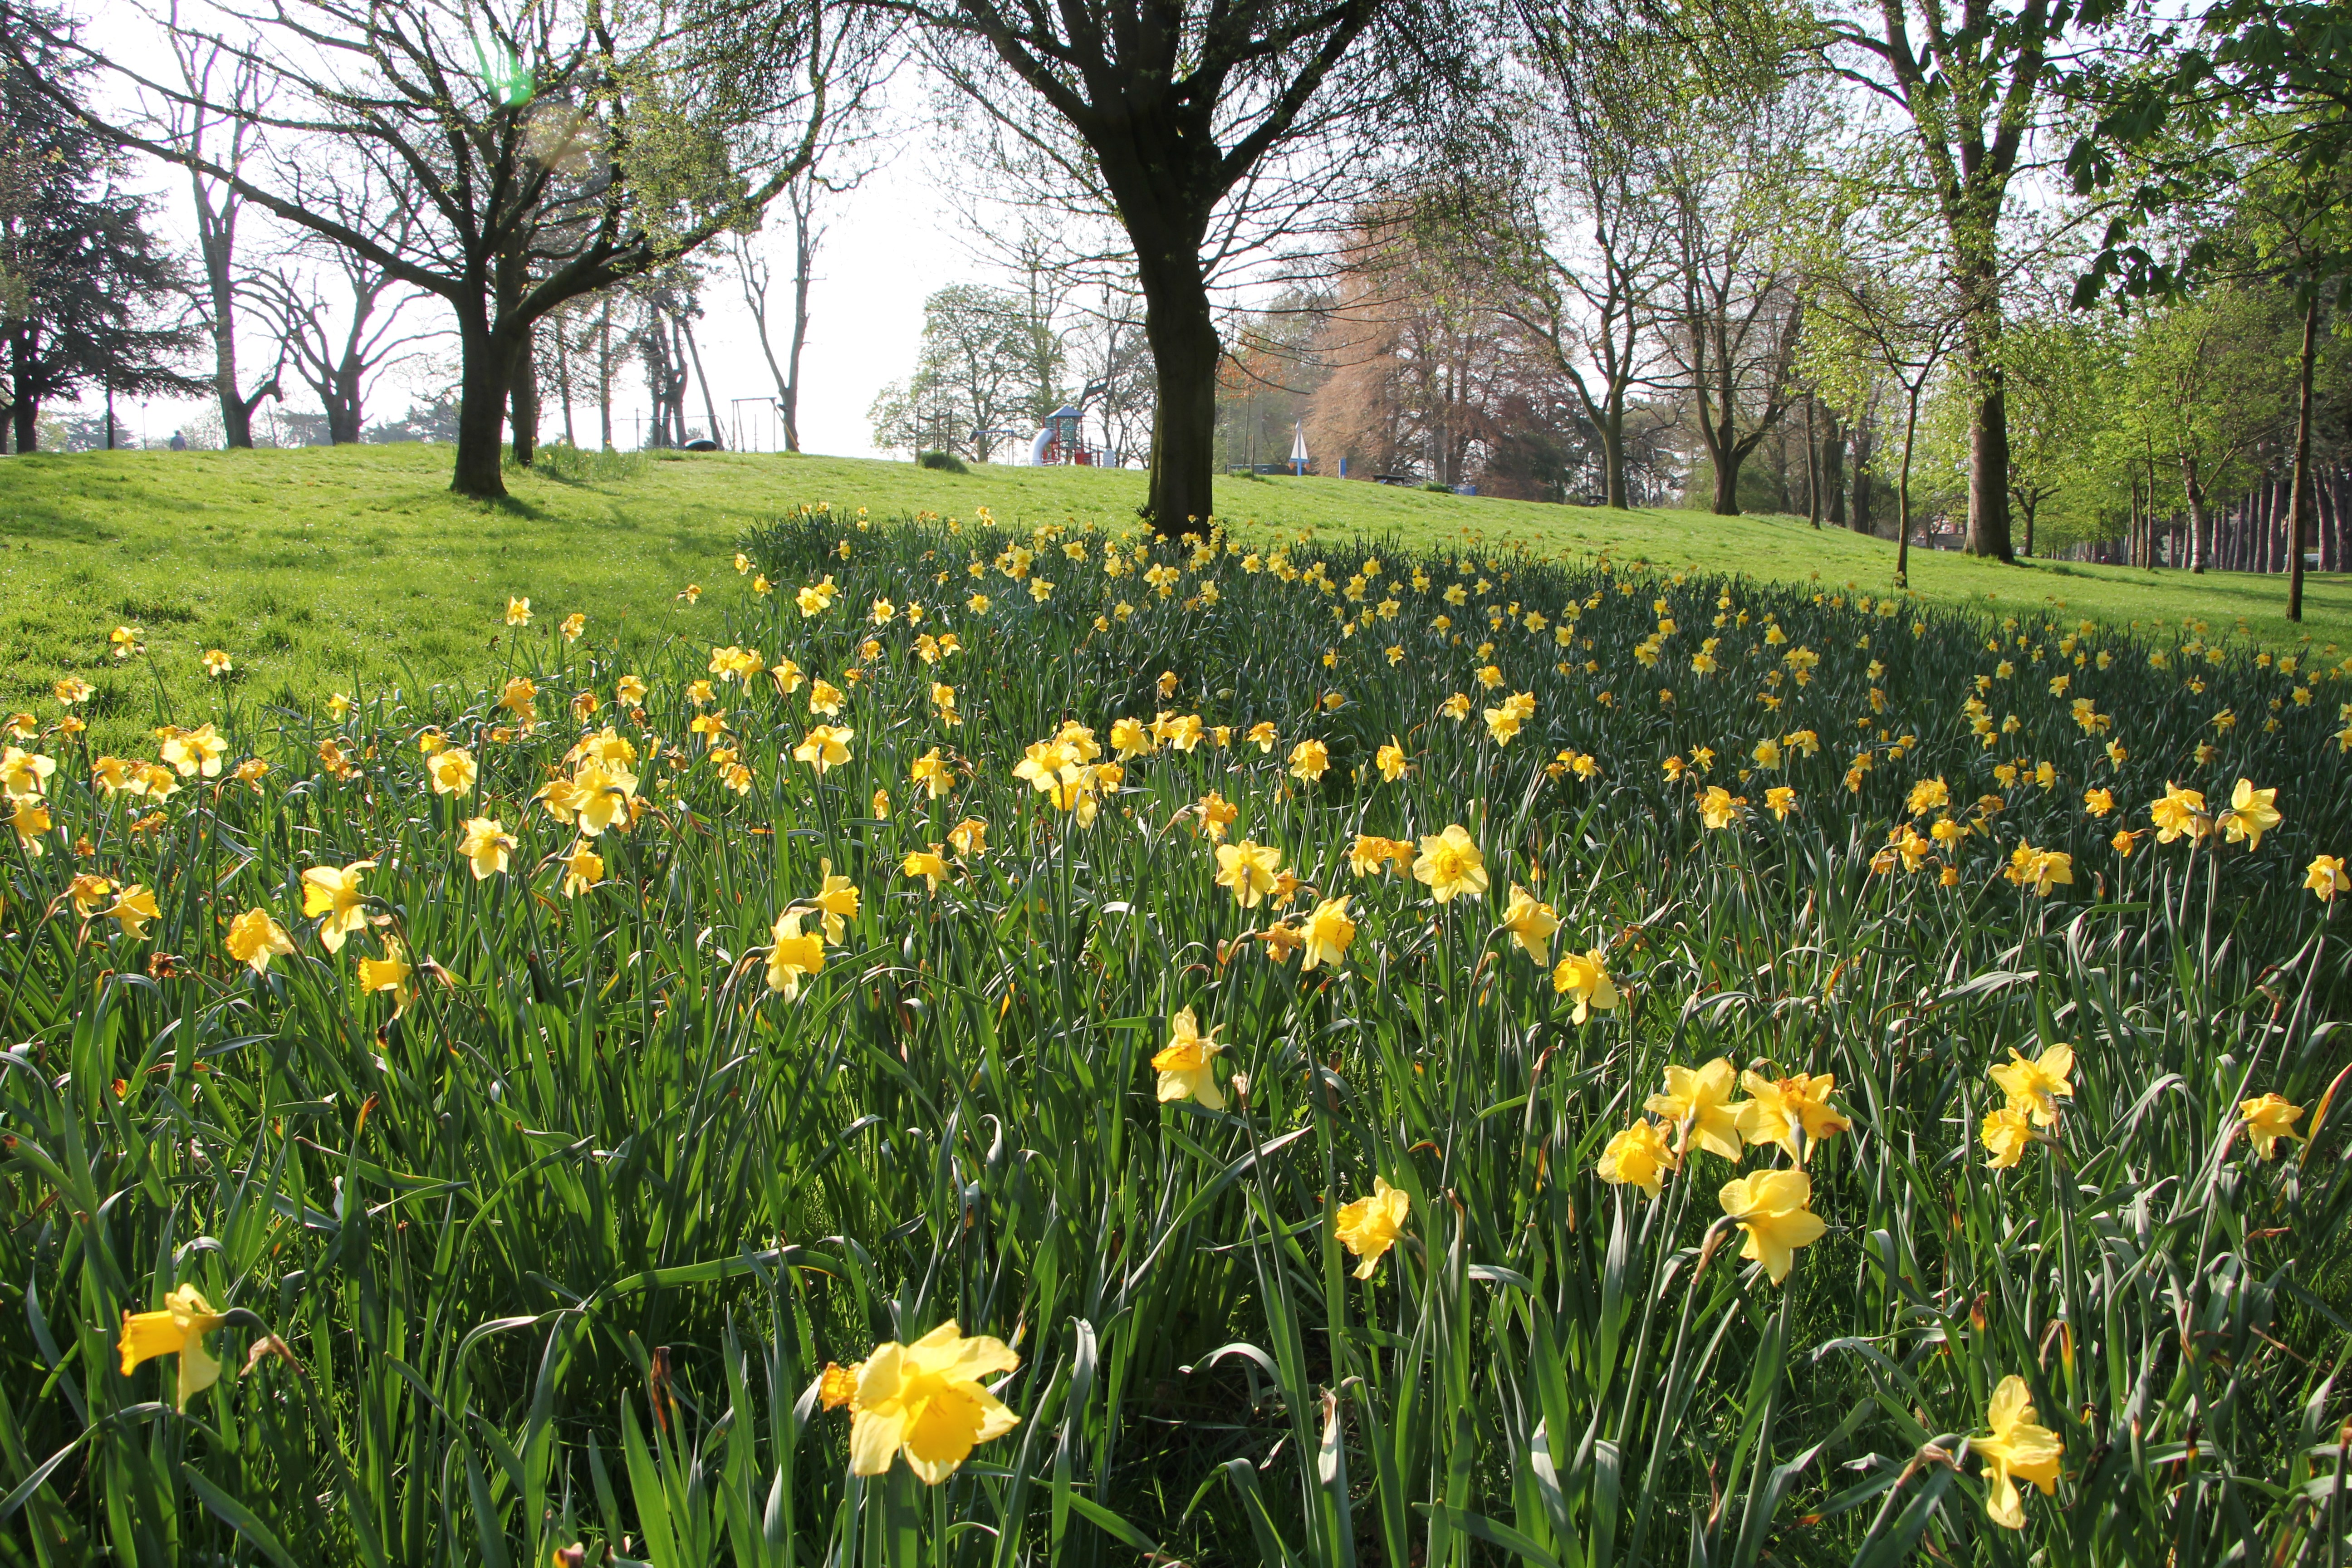 Daffodils in bloom at Brinton Park